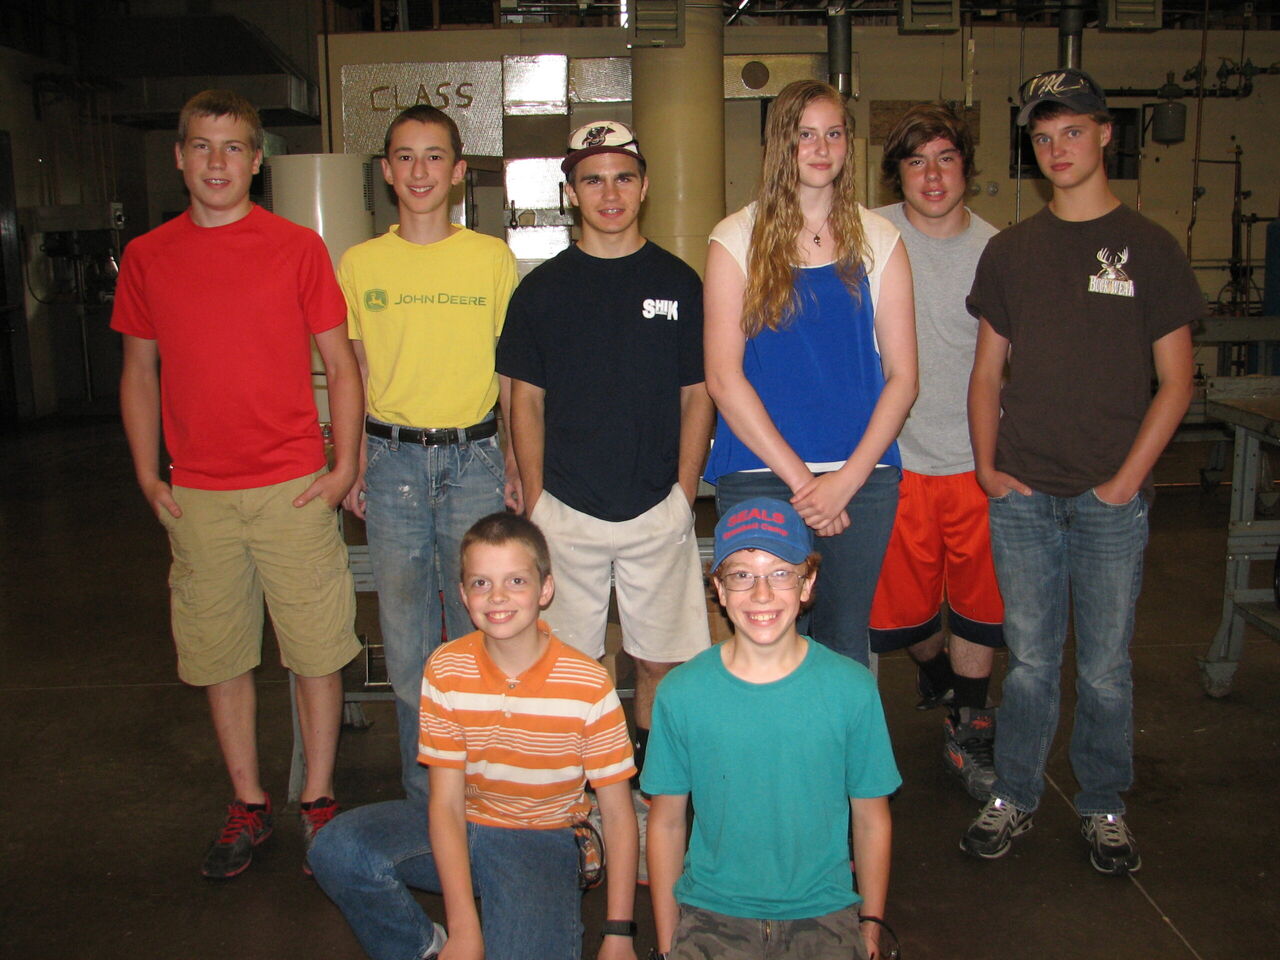 A group photo of the students in the 2014 Construction Camp.